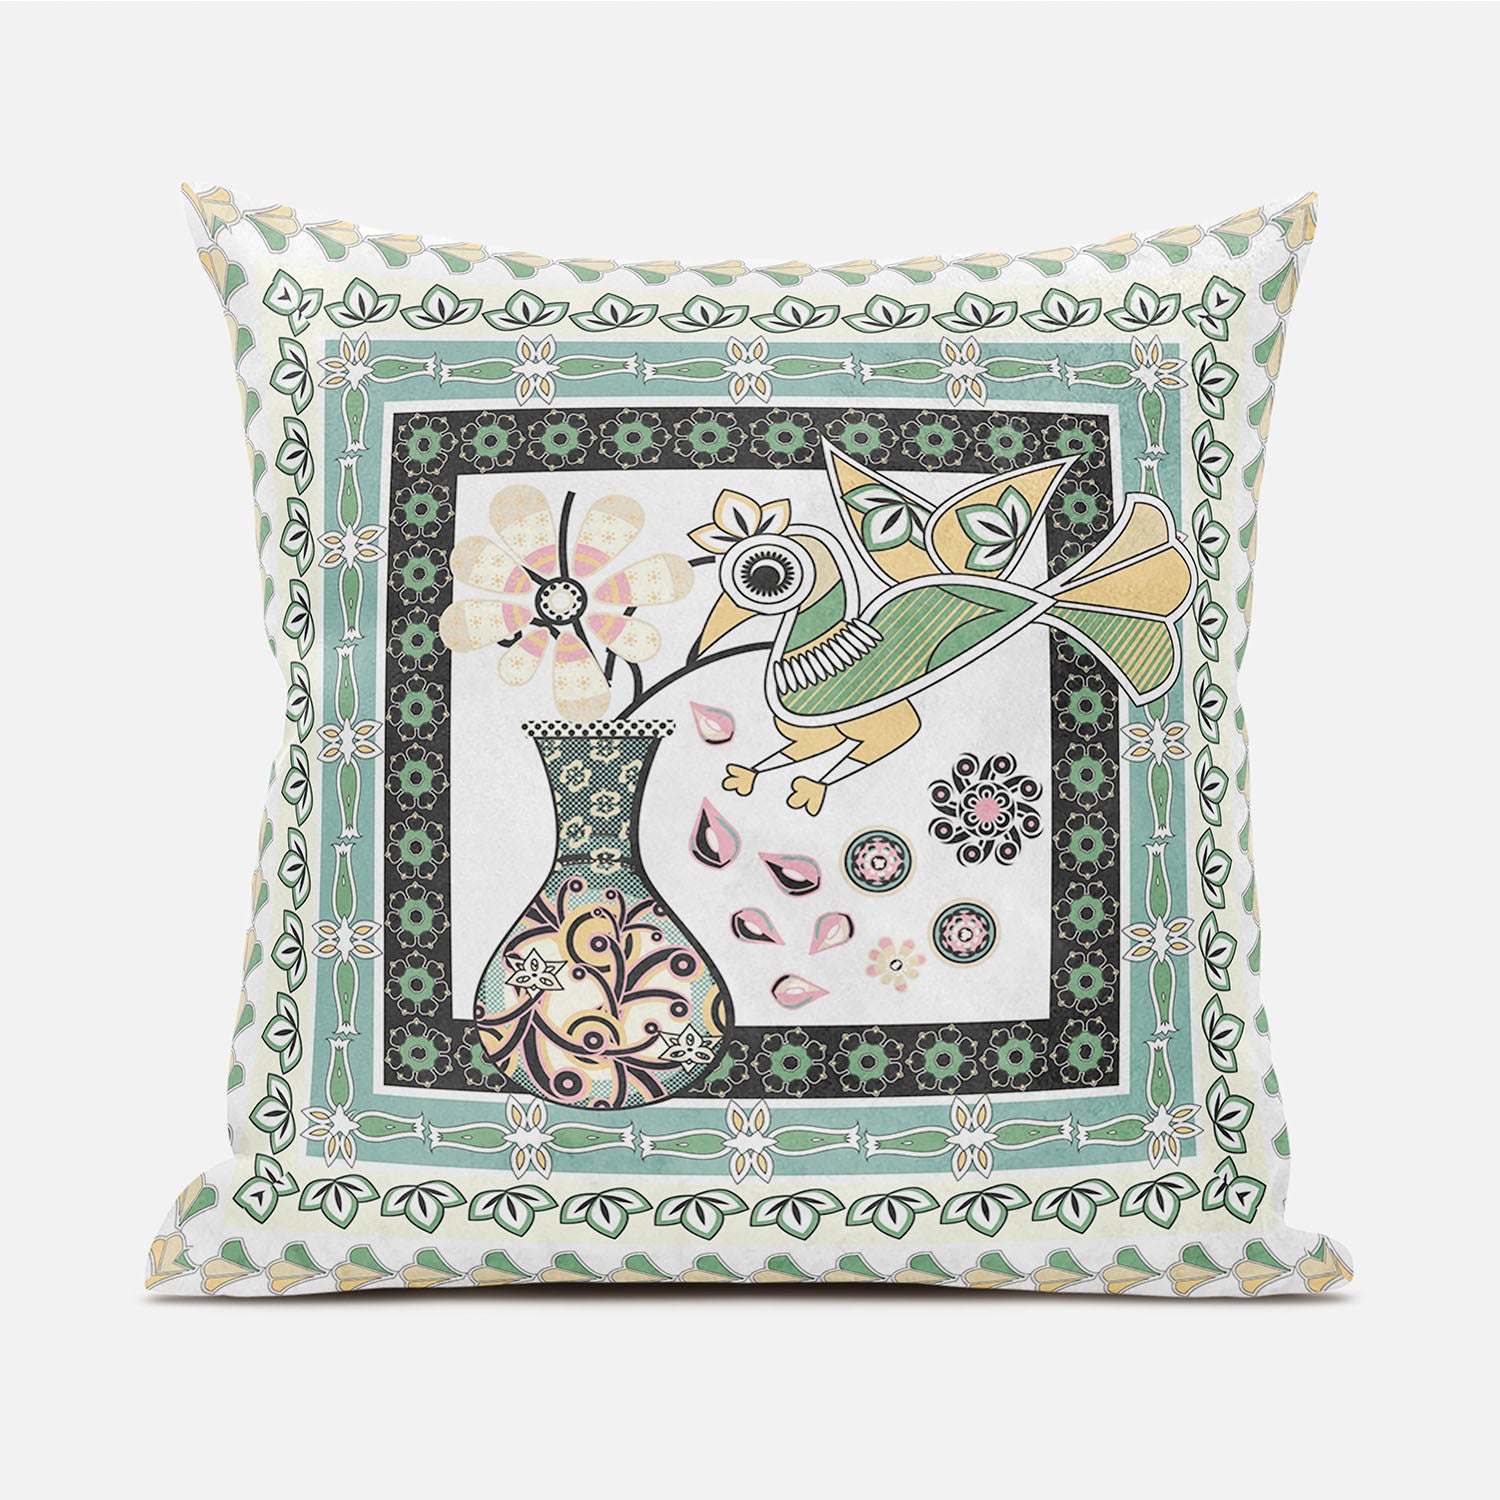 18" X 18" Green and Yellow Peacock Broadcloth Floral Zippered Pillow